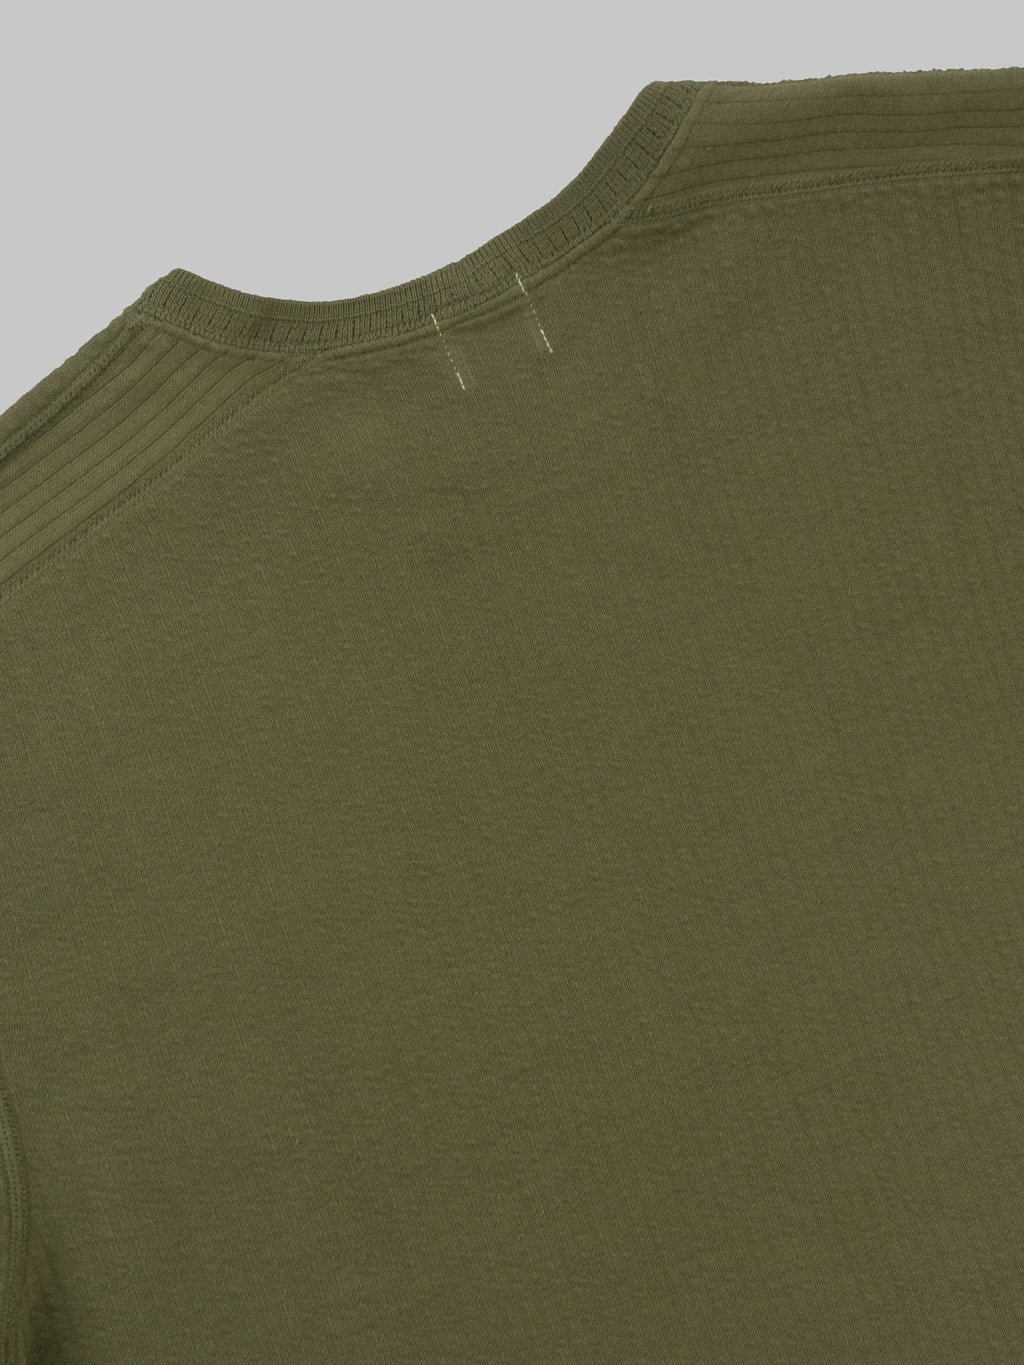 Loop Weft Double Face Jacquard henley Thermal army olive back collar